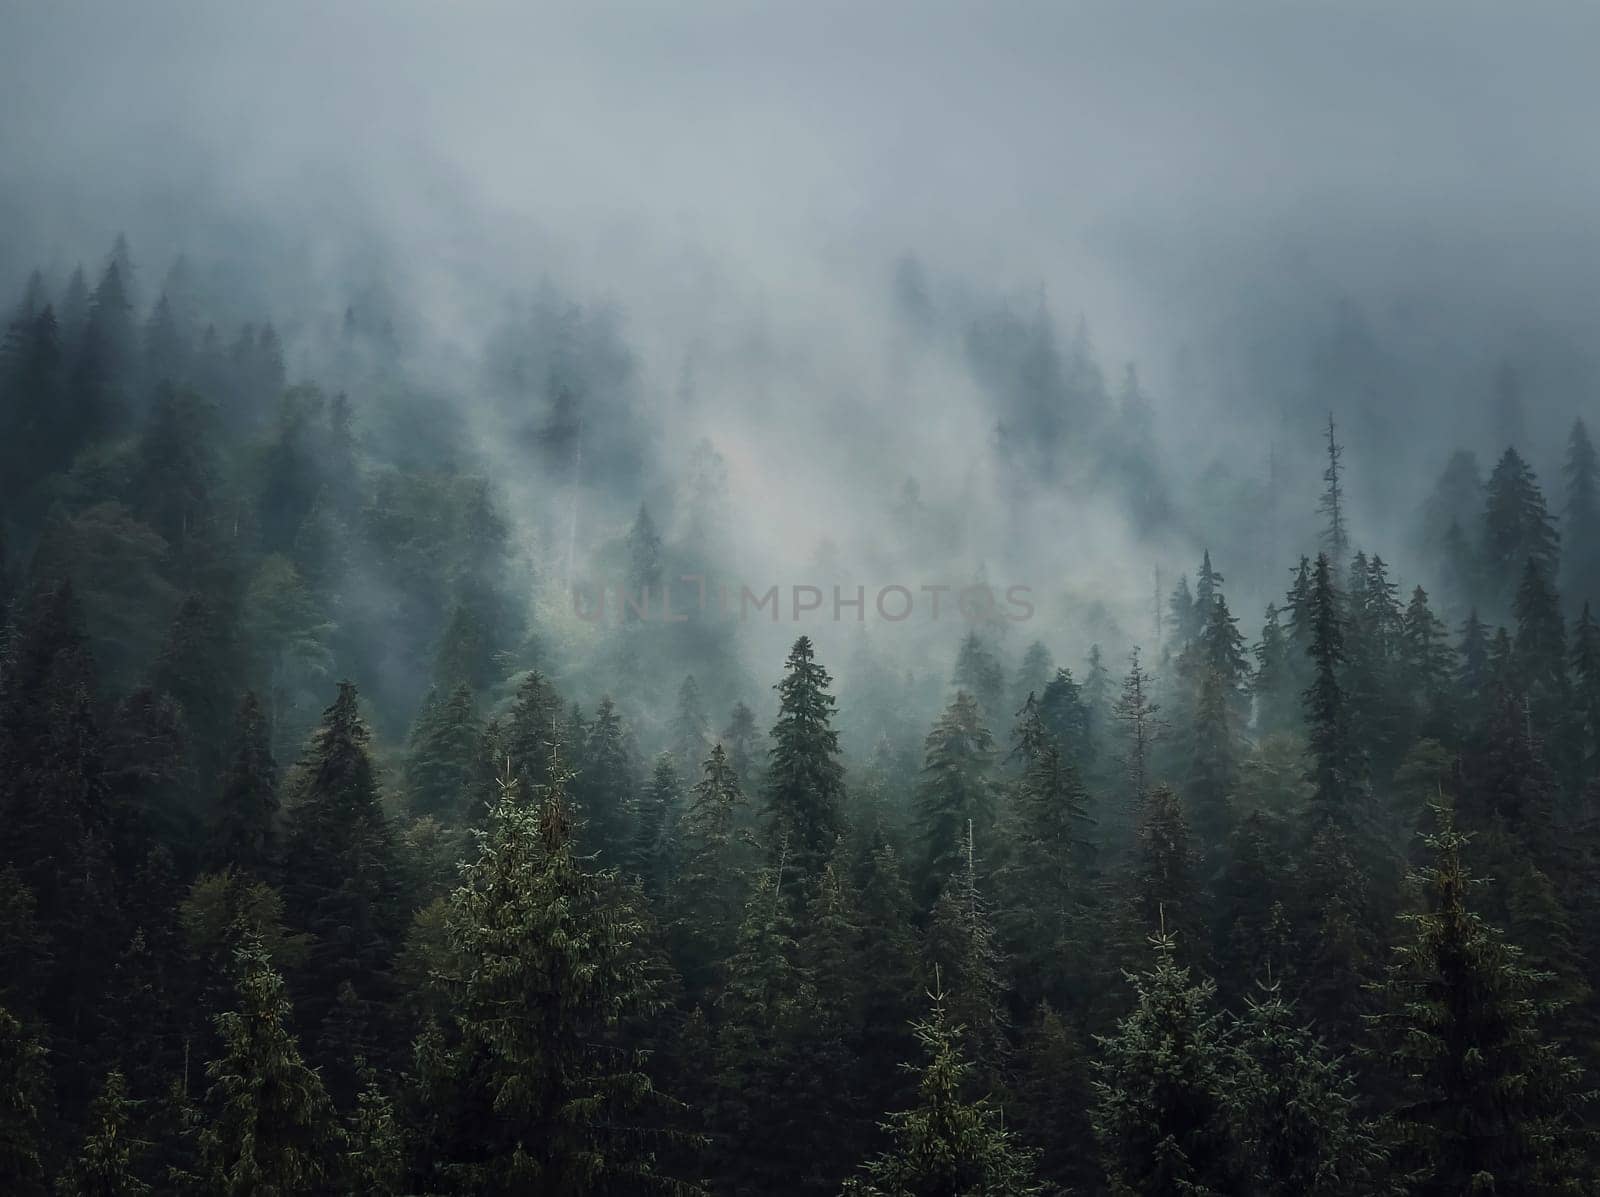 Sunlit foggy fir forest background. Peaceful and moody scene with haze clouds moving above the coniferous trees. Natural landscape with pine woods on the mountain hills covered with mist by psychoshadow